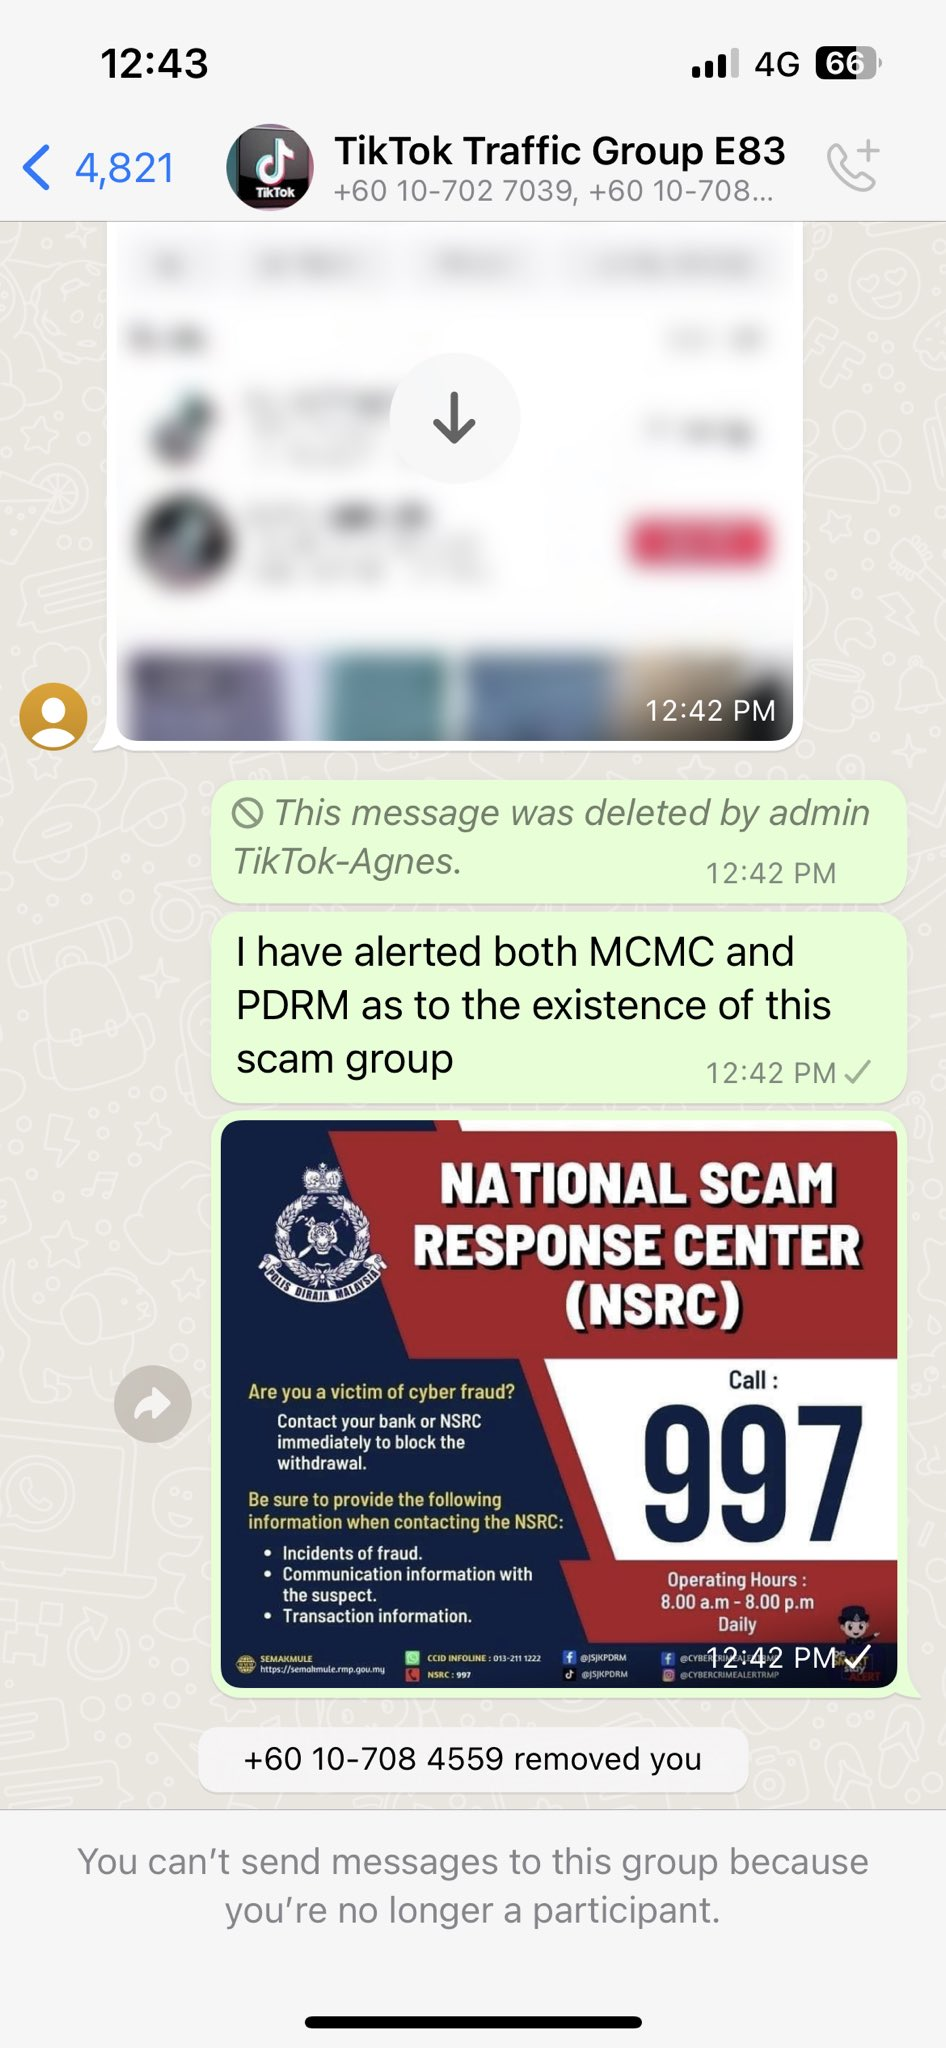 Communications minister gets kicked out of whatsapp group by scammer after he said he contacted police